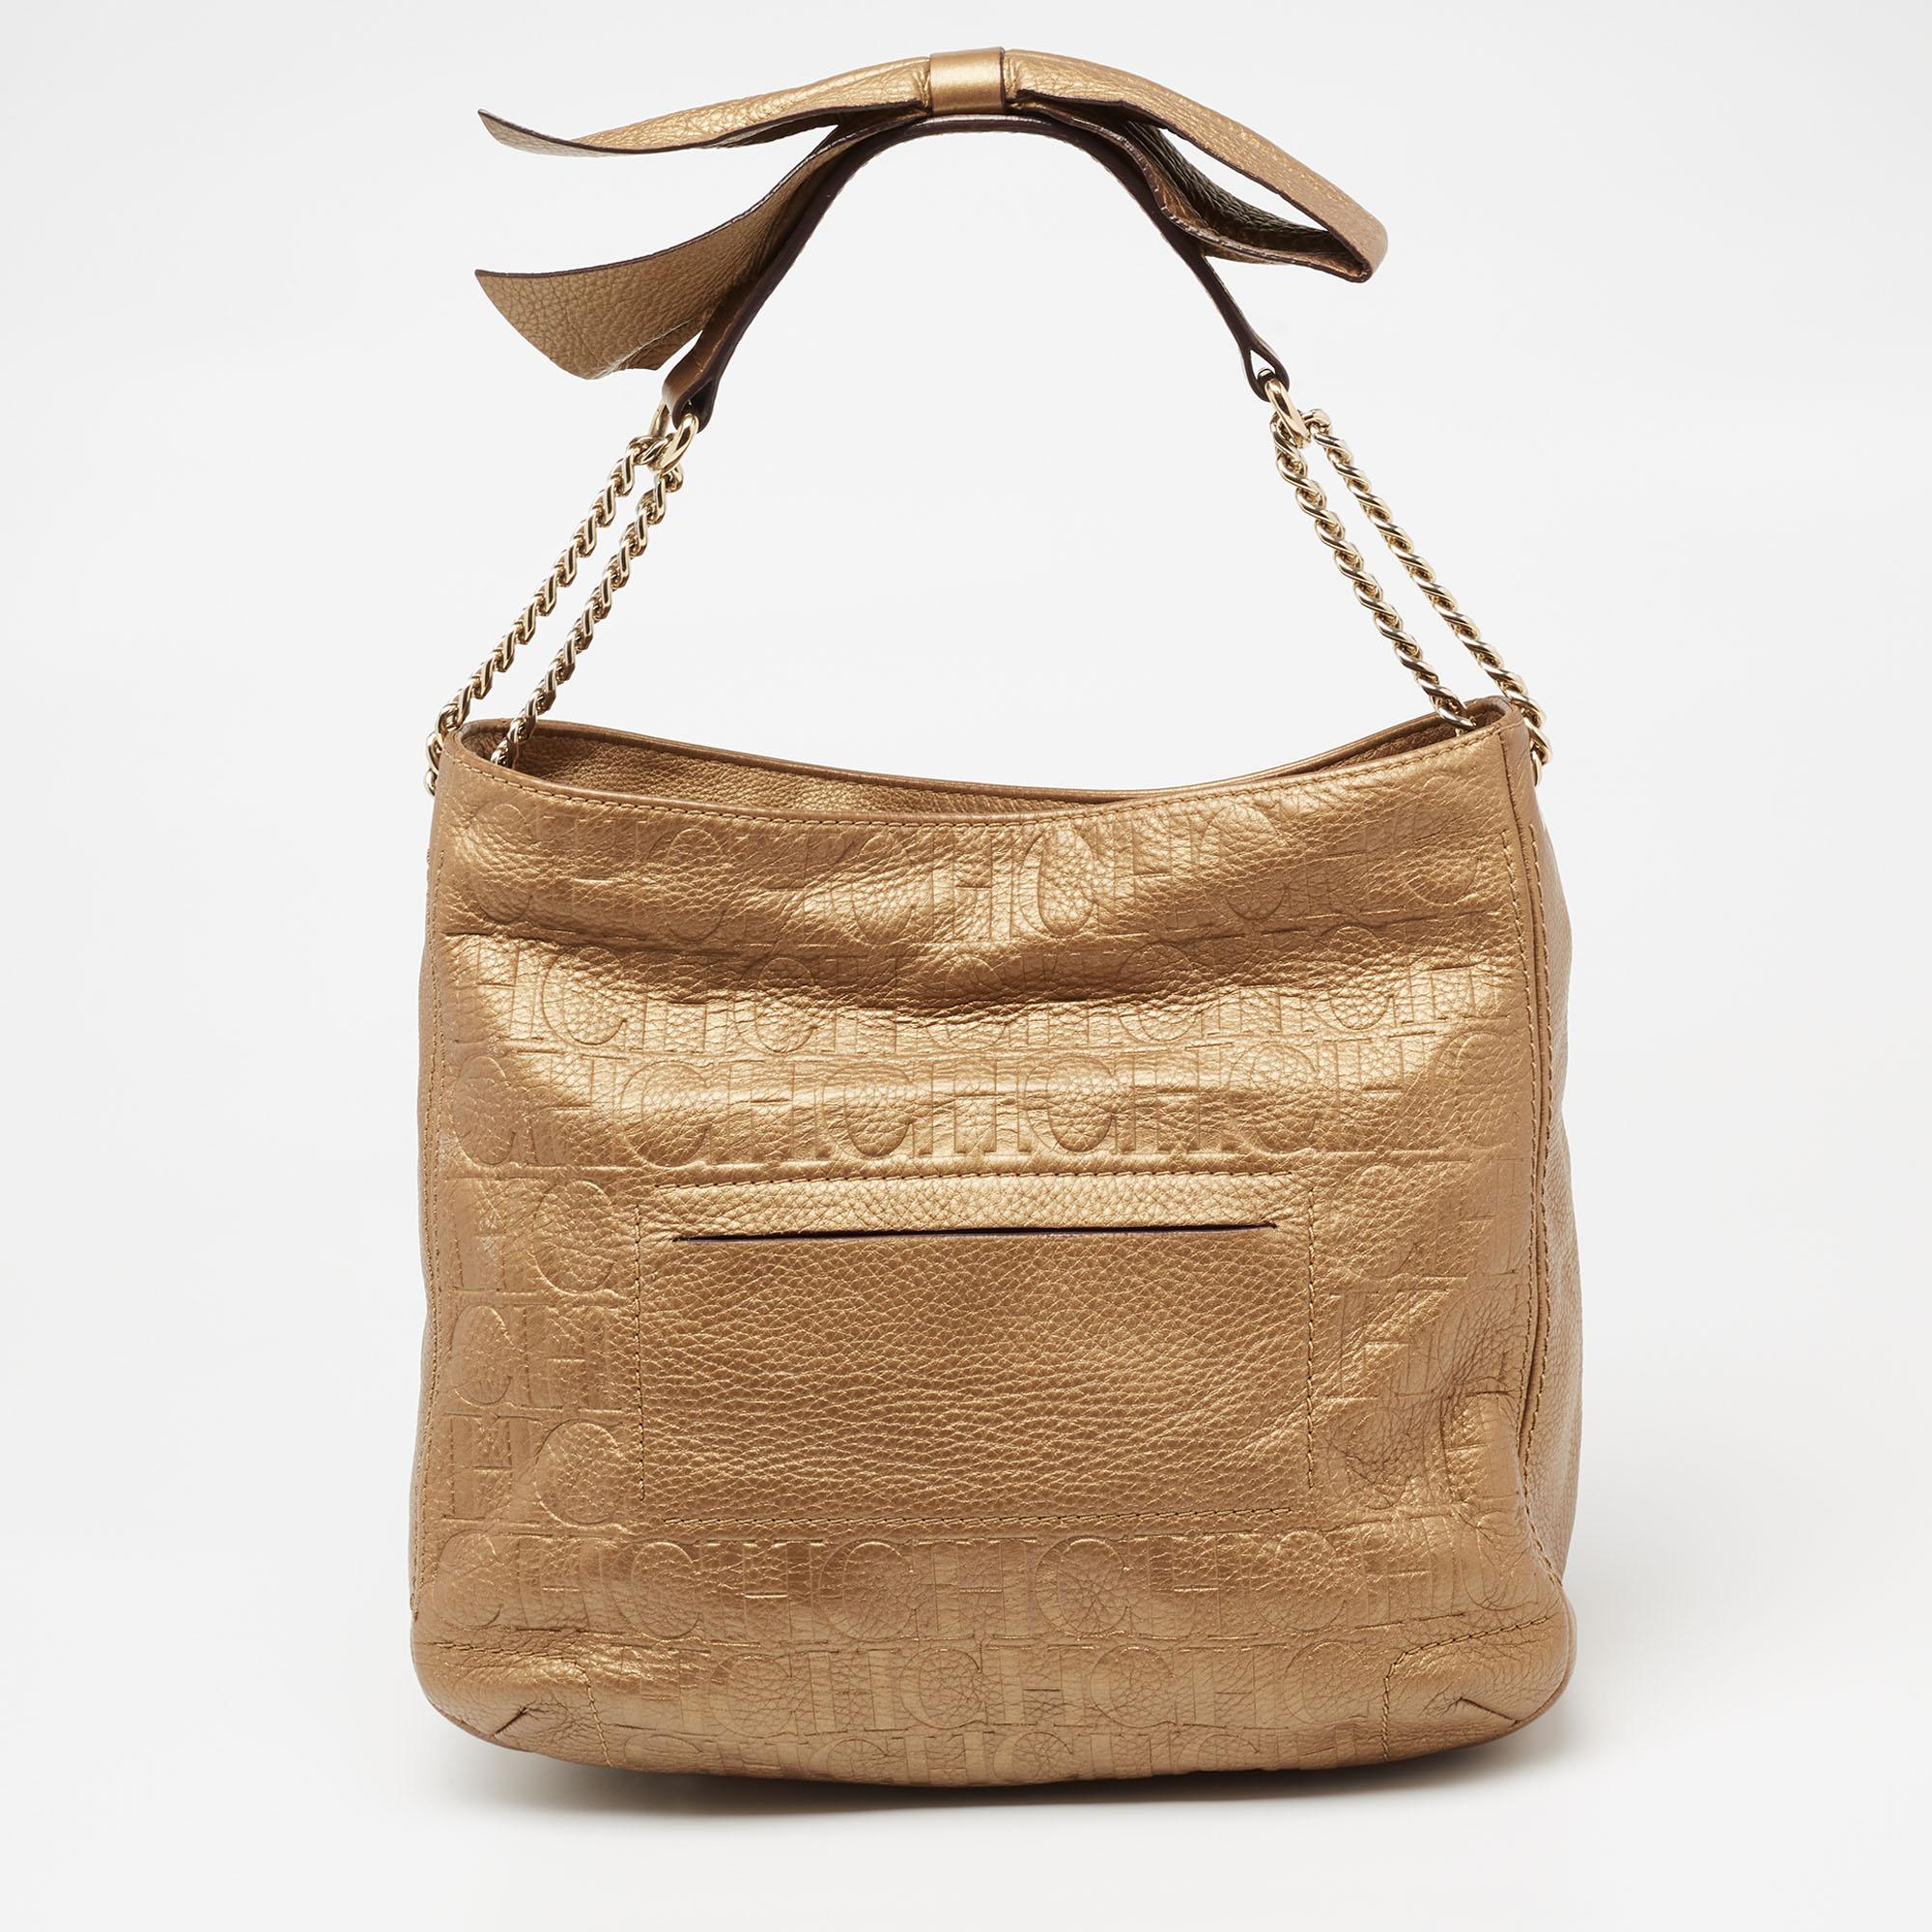 CH Carolina Herrera's hobo has been expertly crafted in sumptuous metallic gold embossed leather. It features a bow motif on the chain handles with comfortable shoulder rests. This stylish bag has a spacious interior with a wall pocket to keep